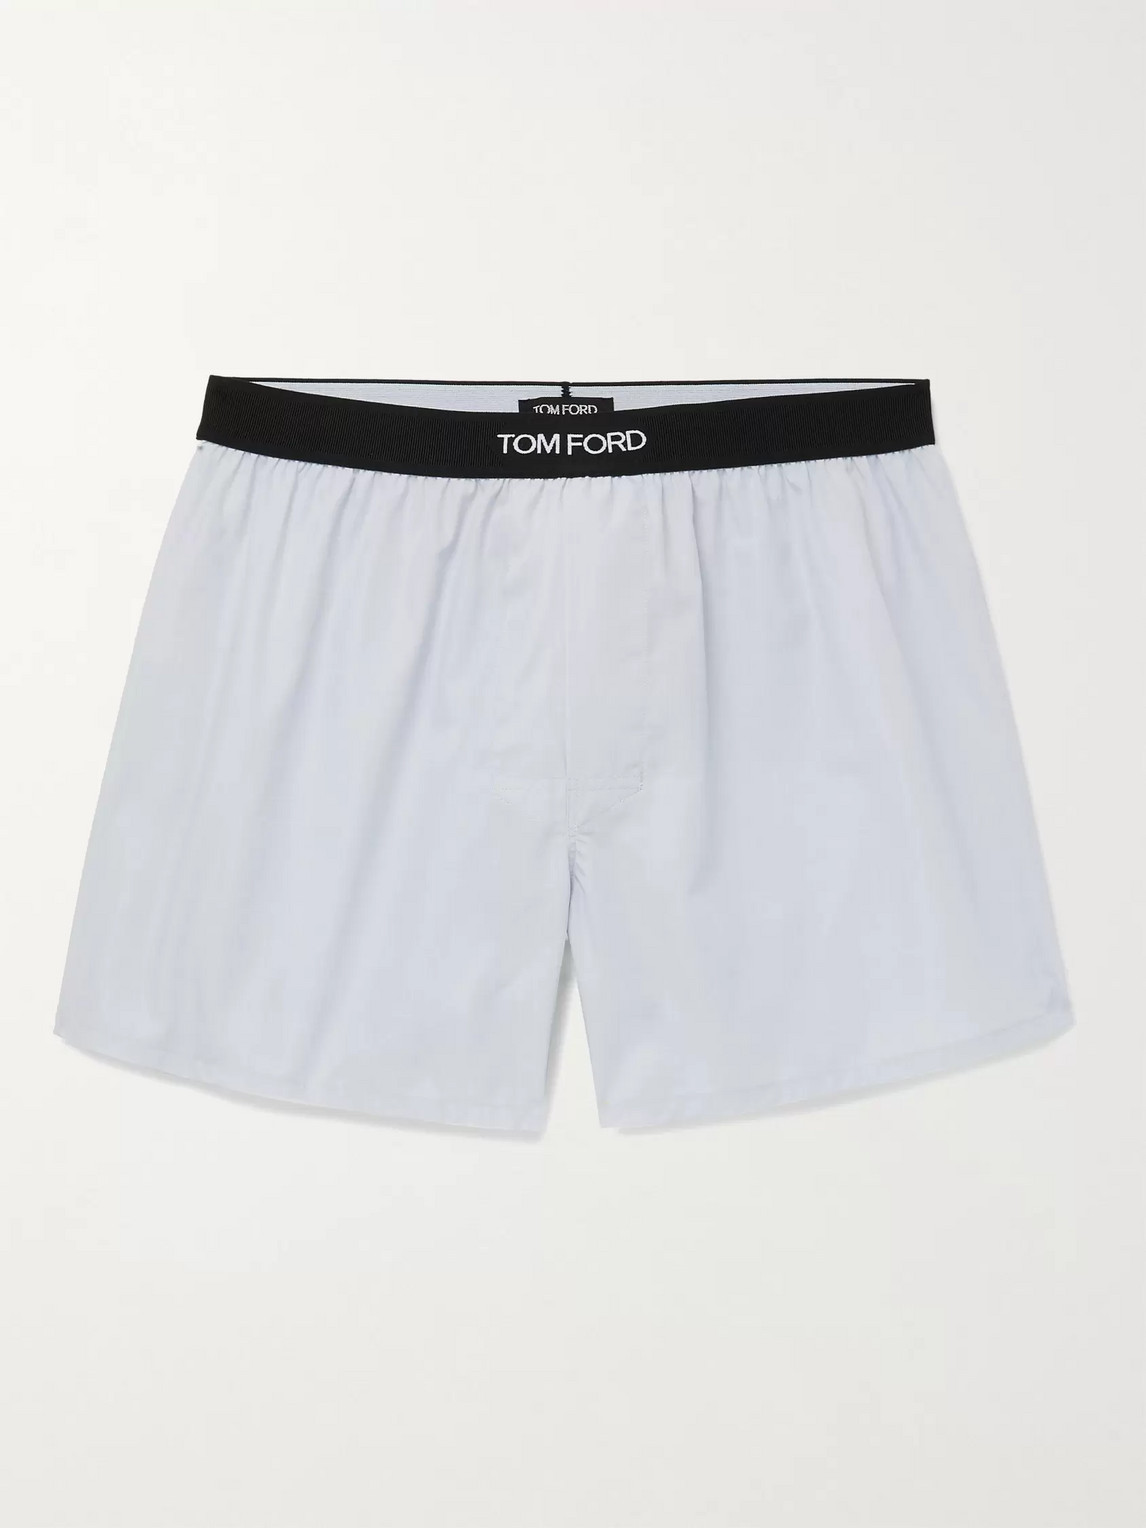 Tom Ford Cotton Boxer Shorts In Grey